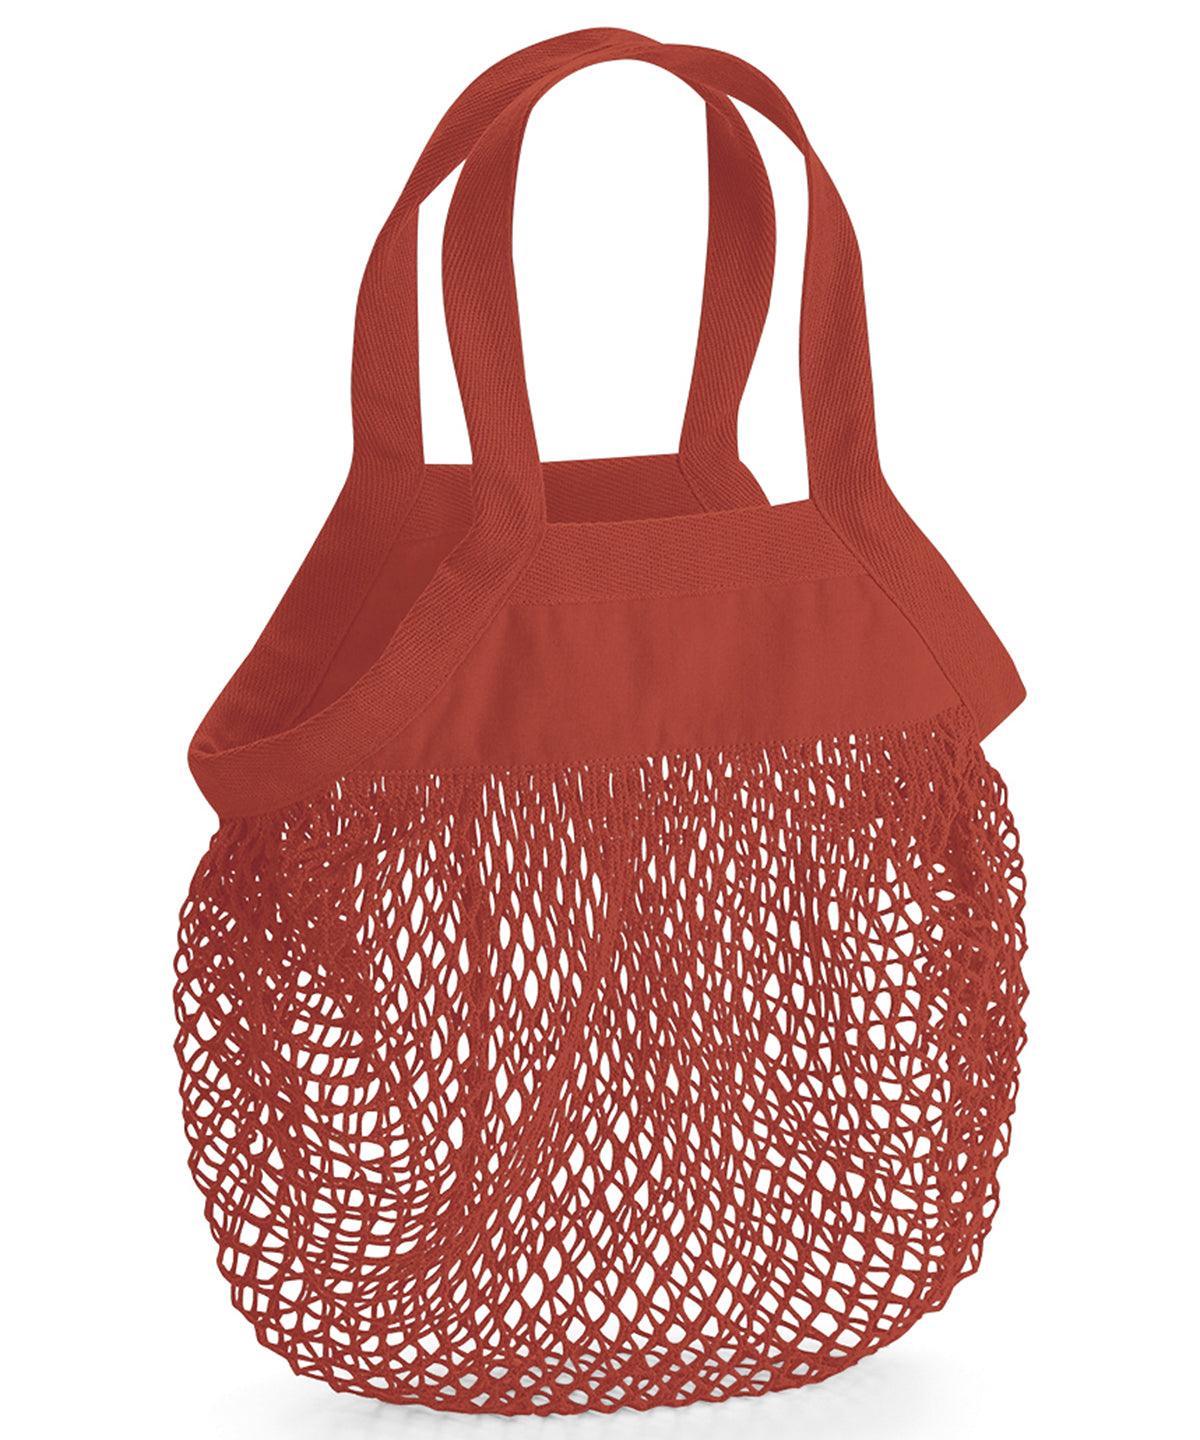 Orange Rust - Organic cotton mini mesh grocery bag Bags Westford Mill Bags & Luggage, New For 2021, New Styles For 2021, Organic & Conscious, Summer Accessories Schoolwear Centres